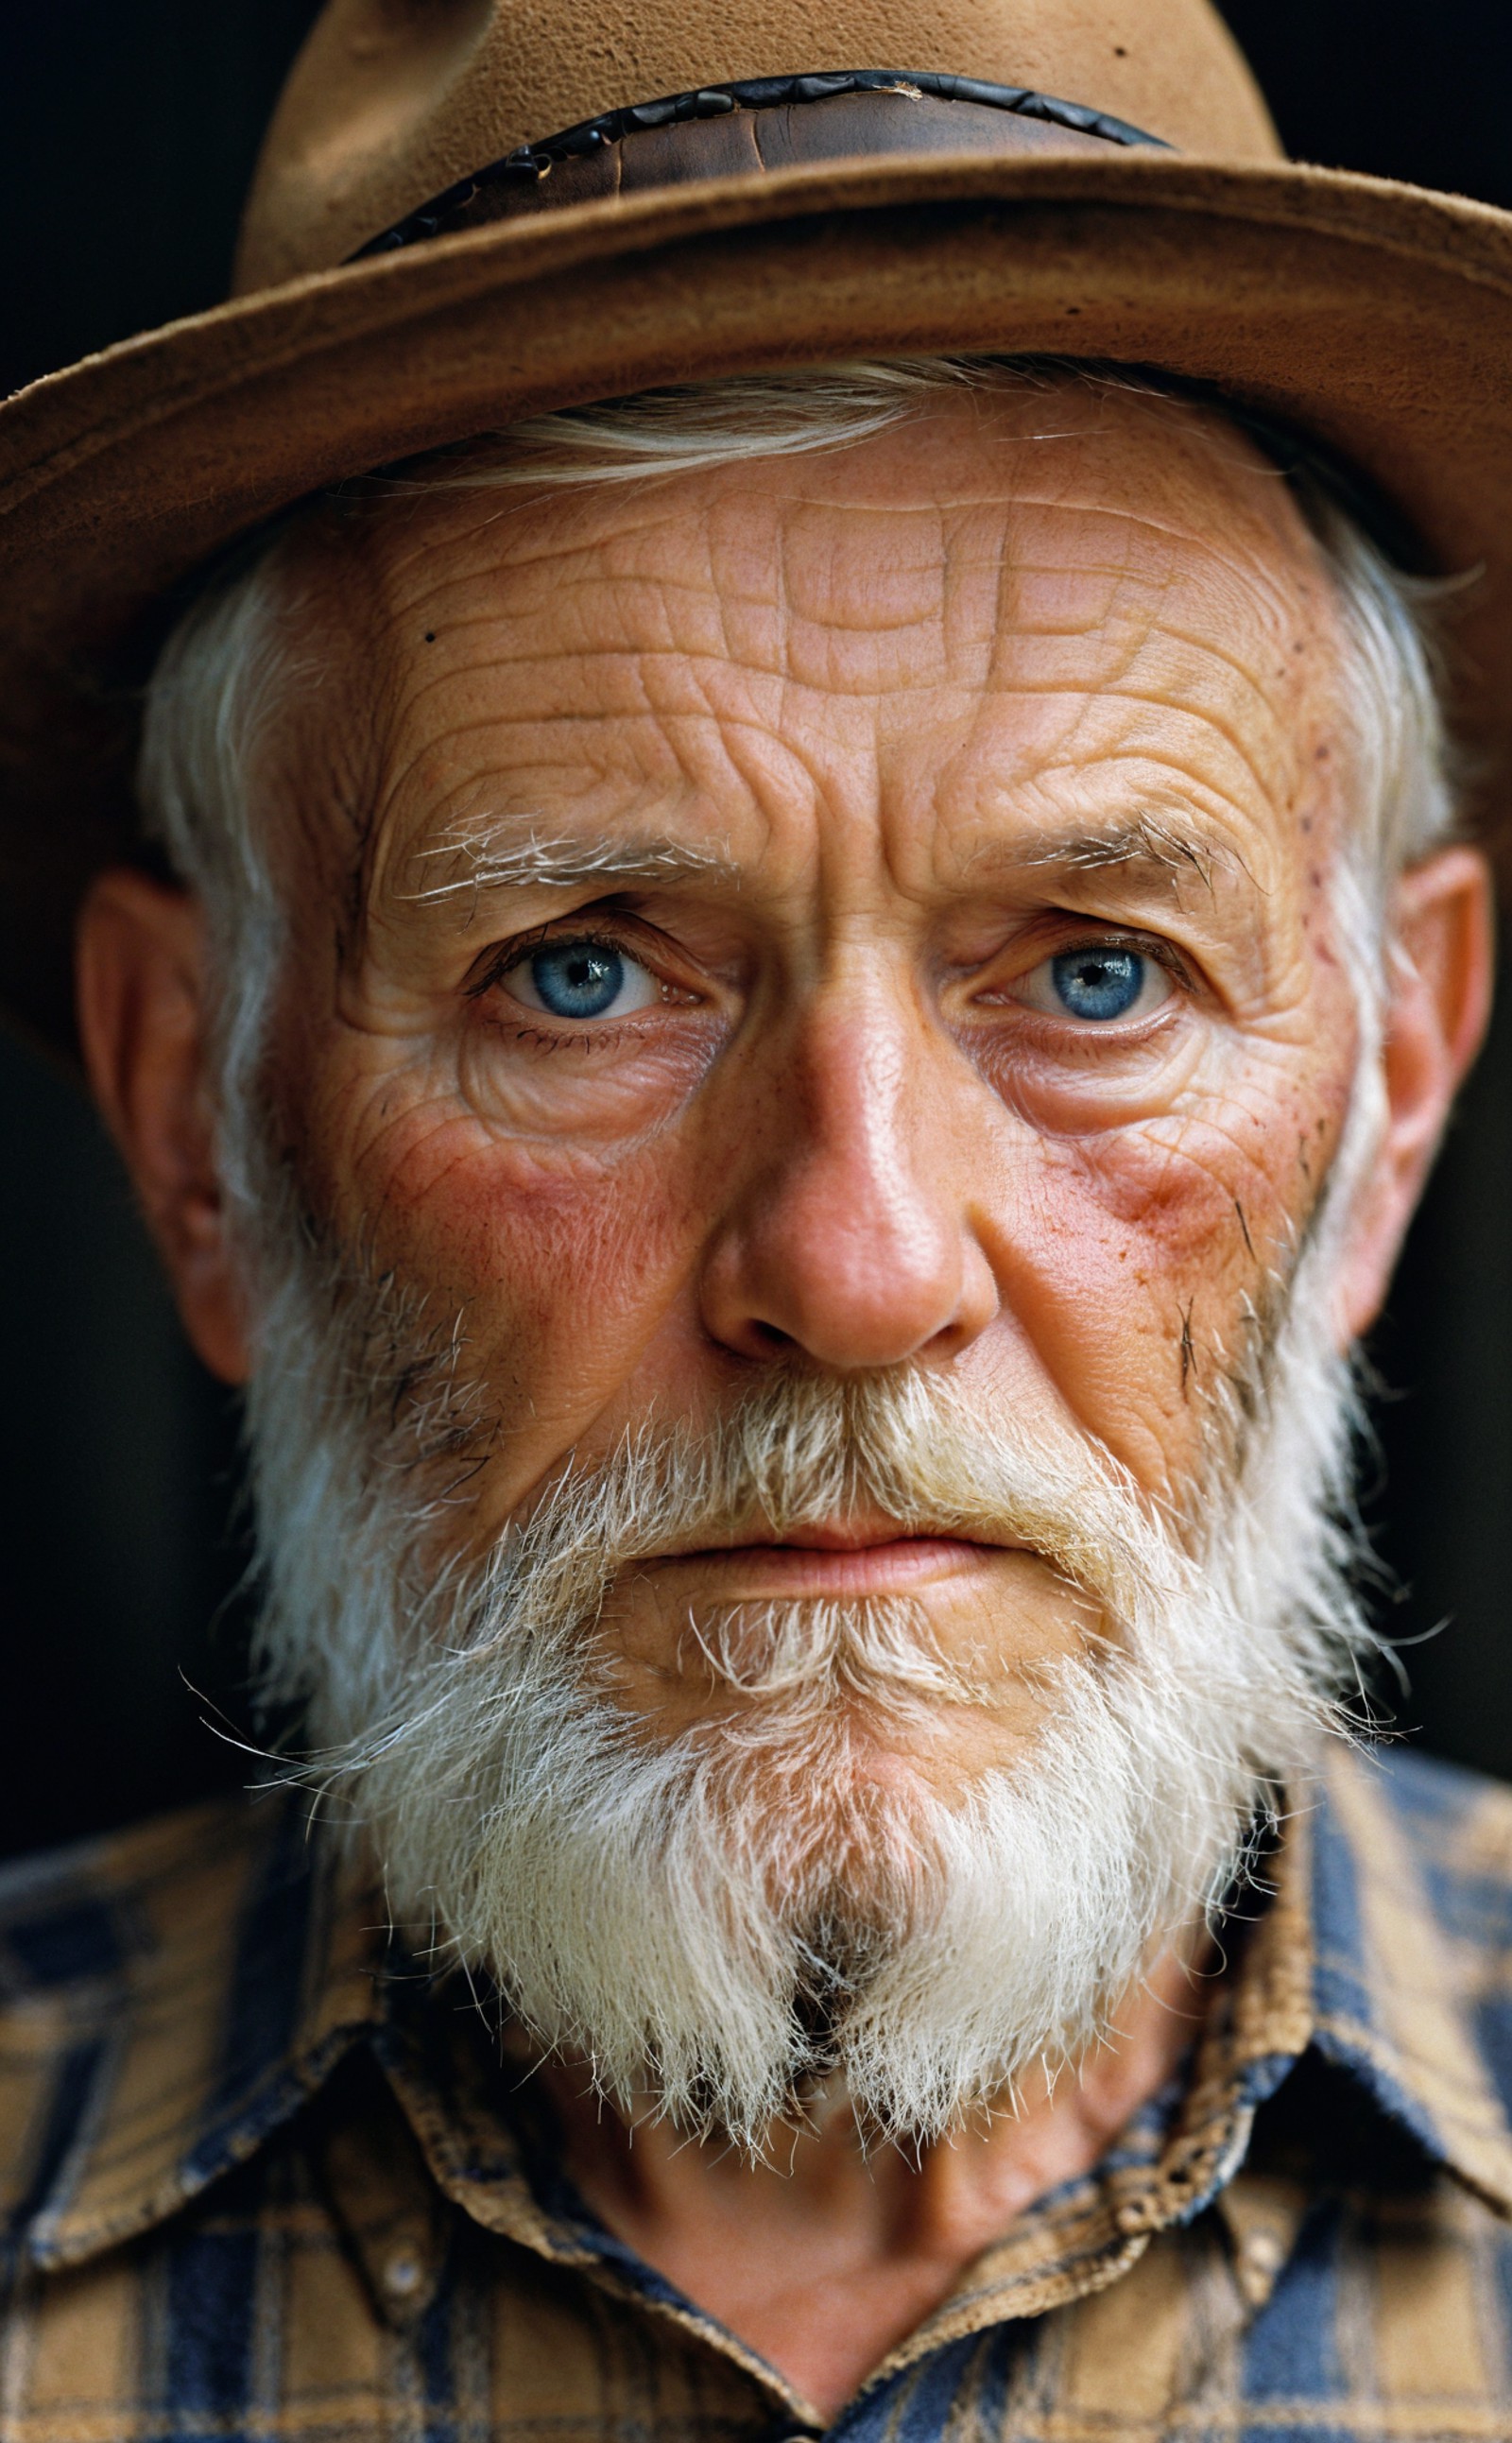 film photography aesthetic,Intense close-up portrait, elderly man with piercing blue eyes, weathered skin, pronounced wrin...